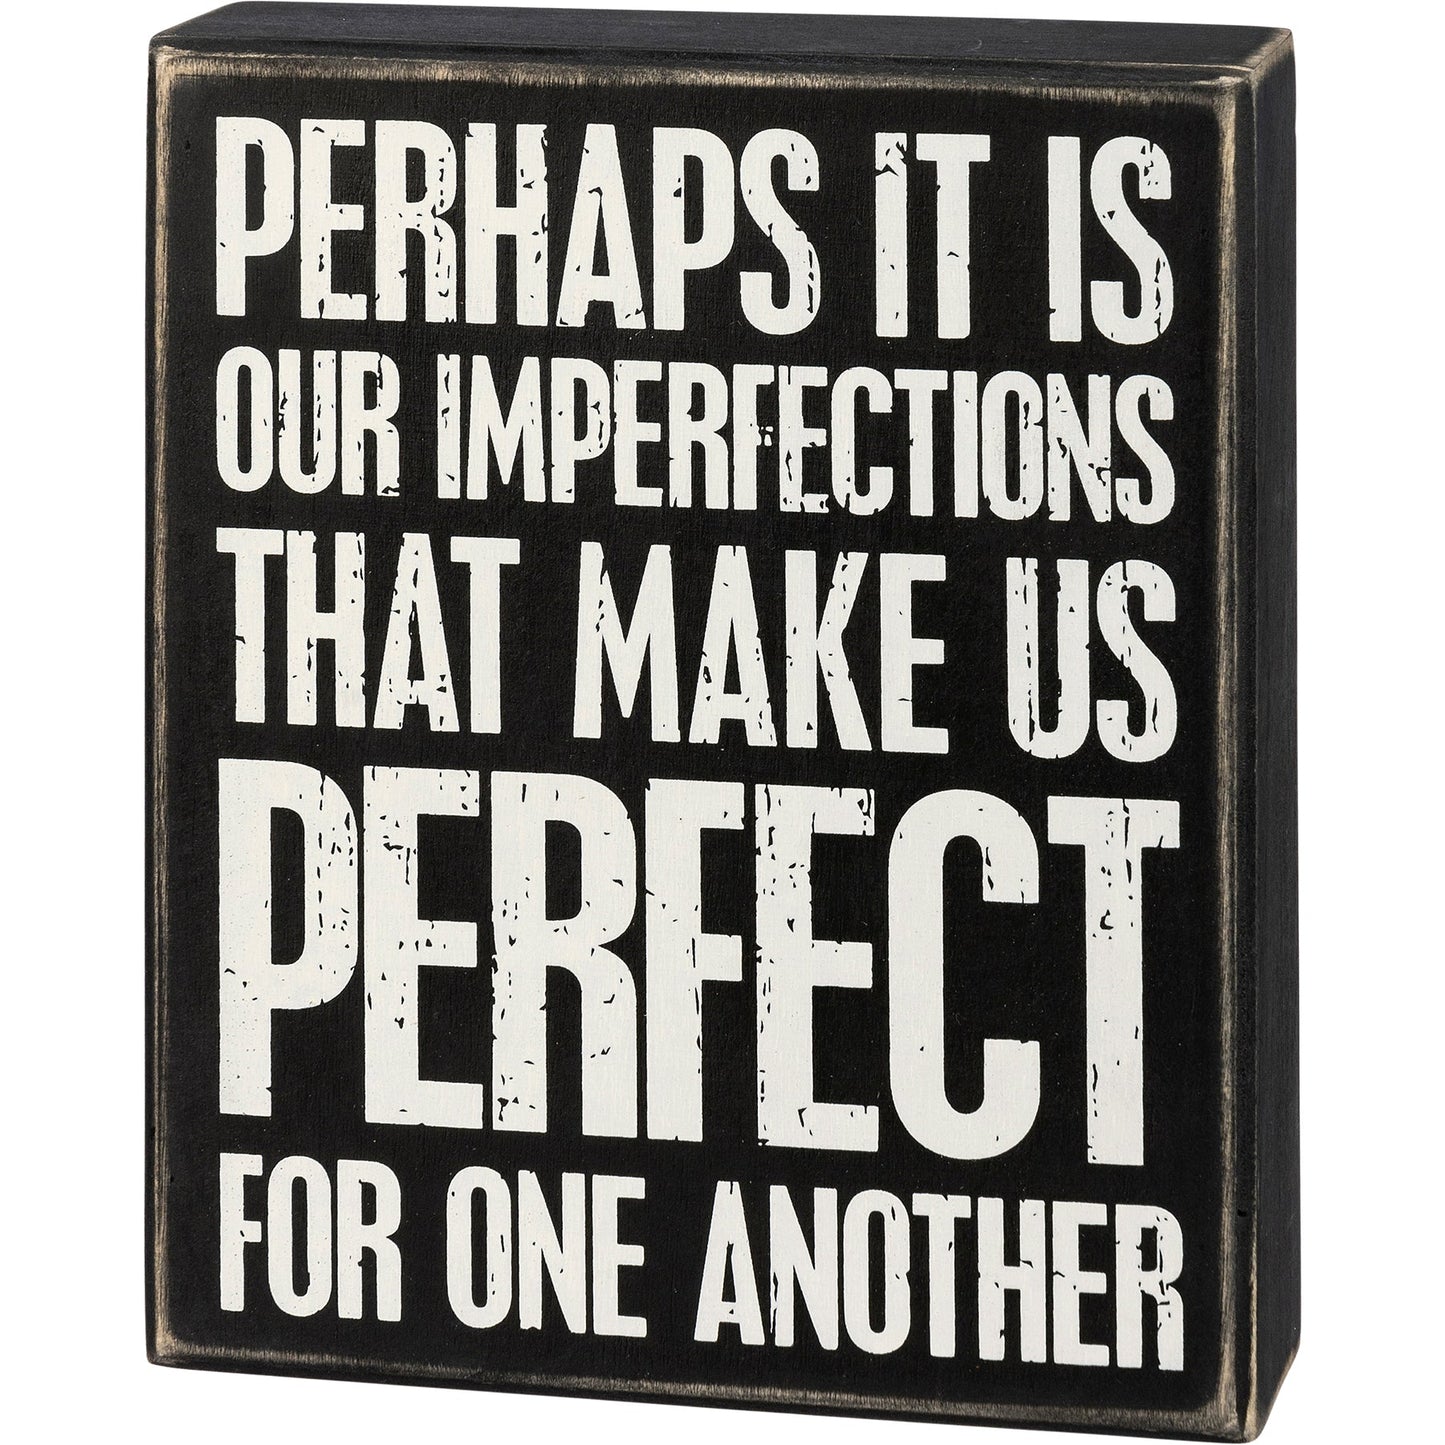 Perhaps It Is Our Imperfections That Make Us Perfect For One Another Box Sign in Black with White Lettering